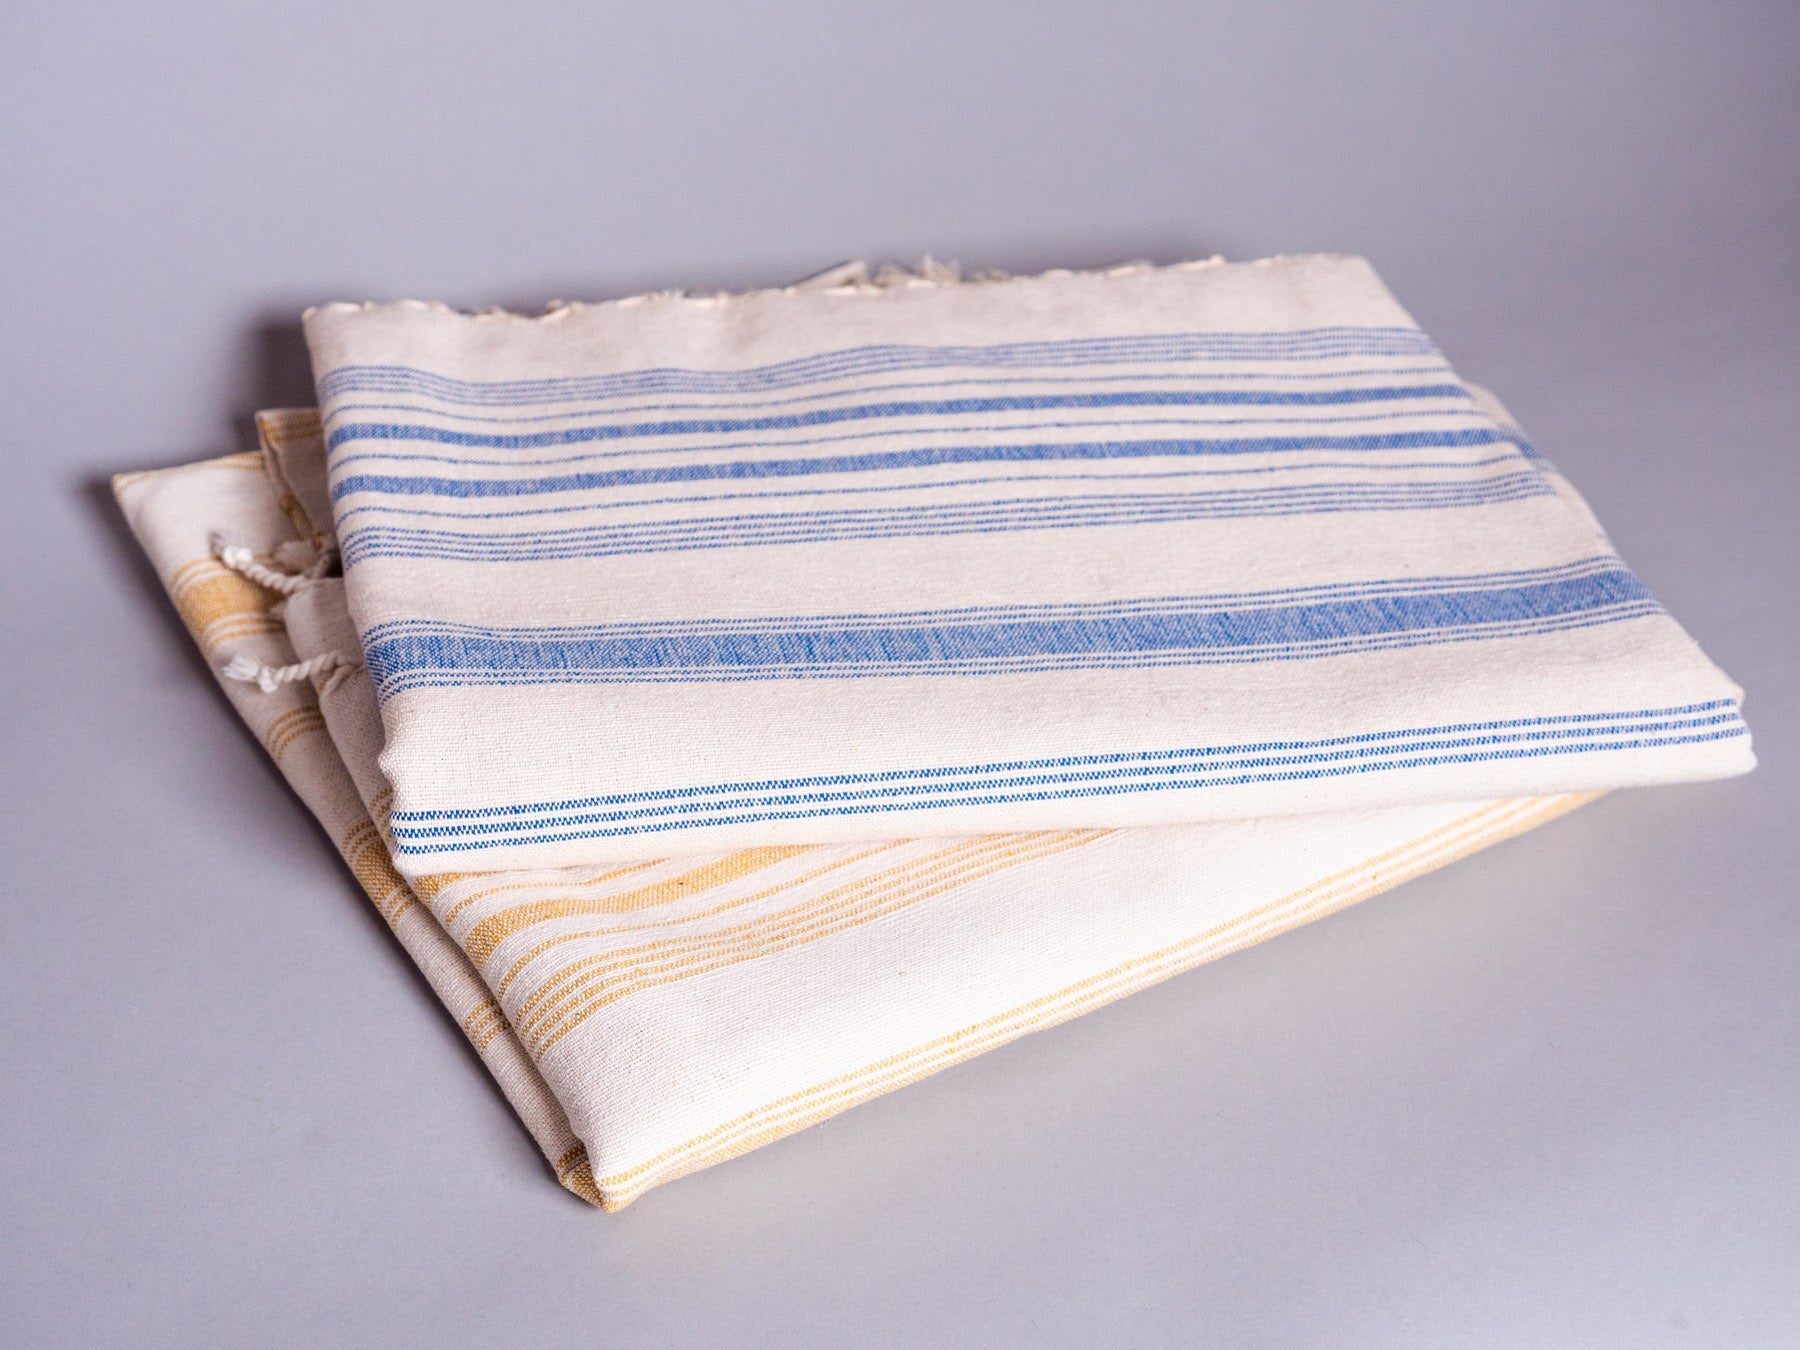 Hand loomed blue striped cotton towel.